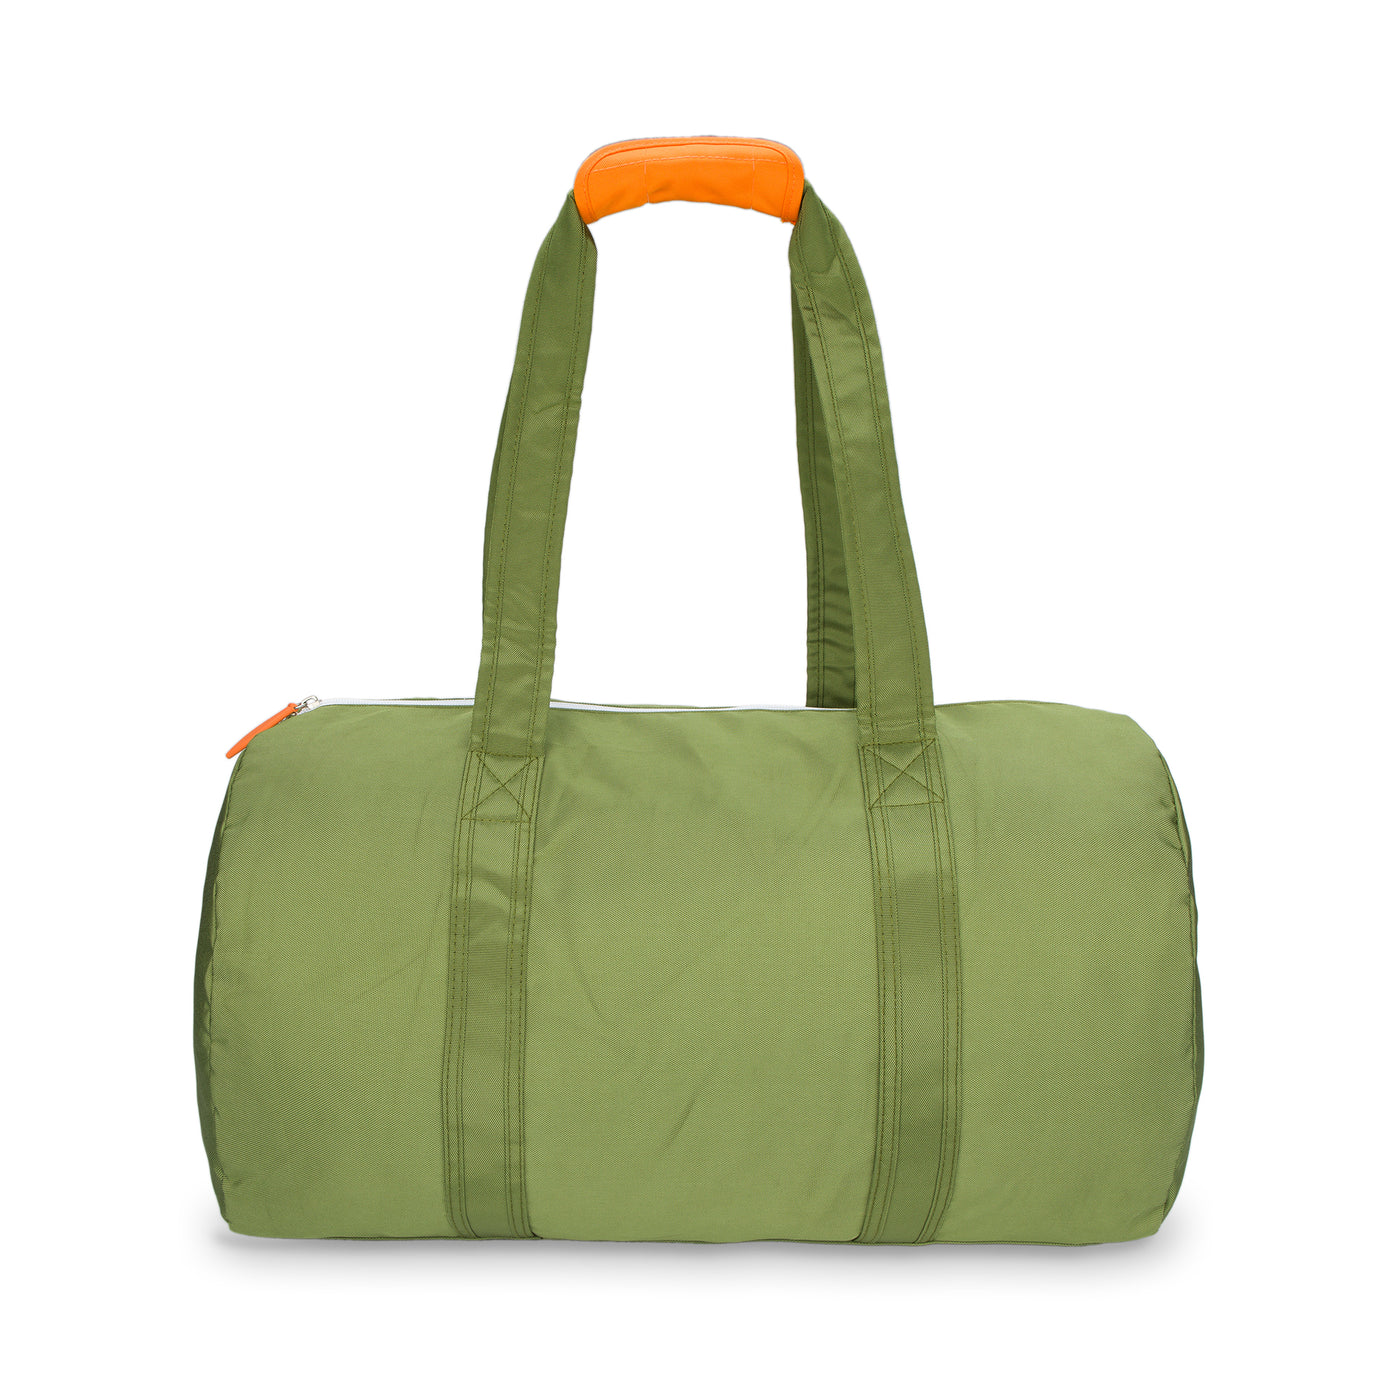 army green duffel with orange cap on the straps